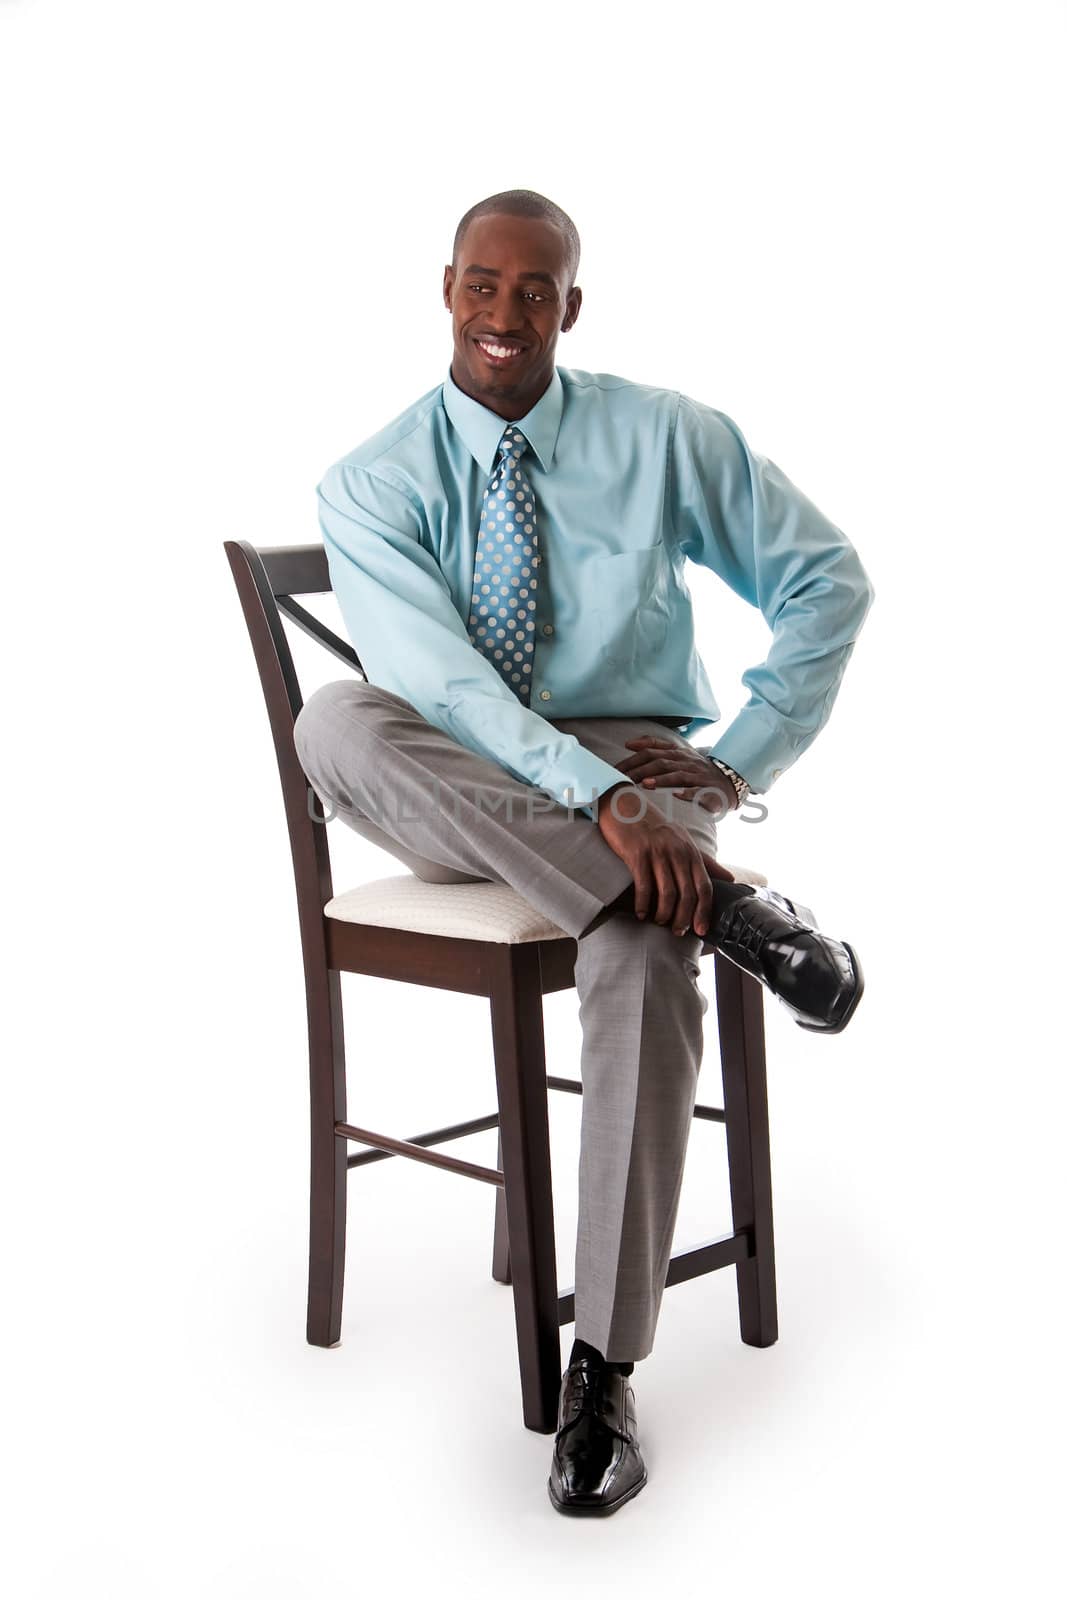 Handsome African American business man smiling sitting on chair, wearing sea green shirt and gray pants, isolated